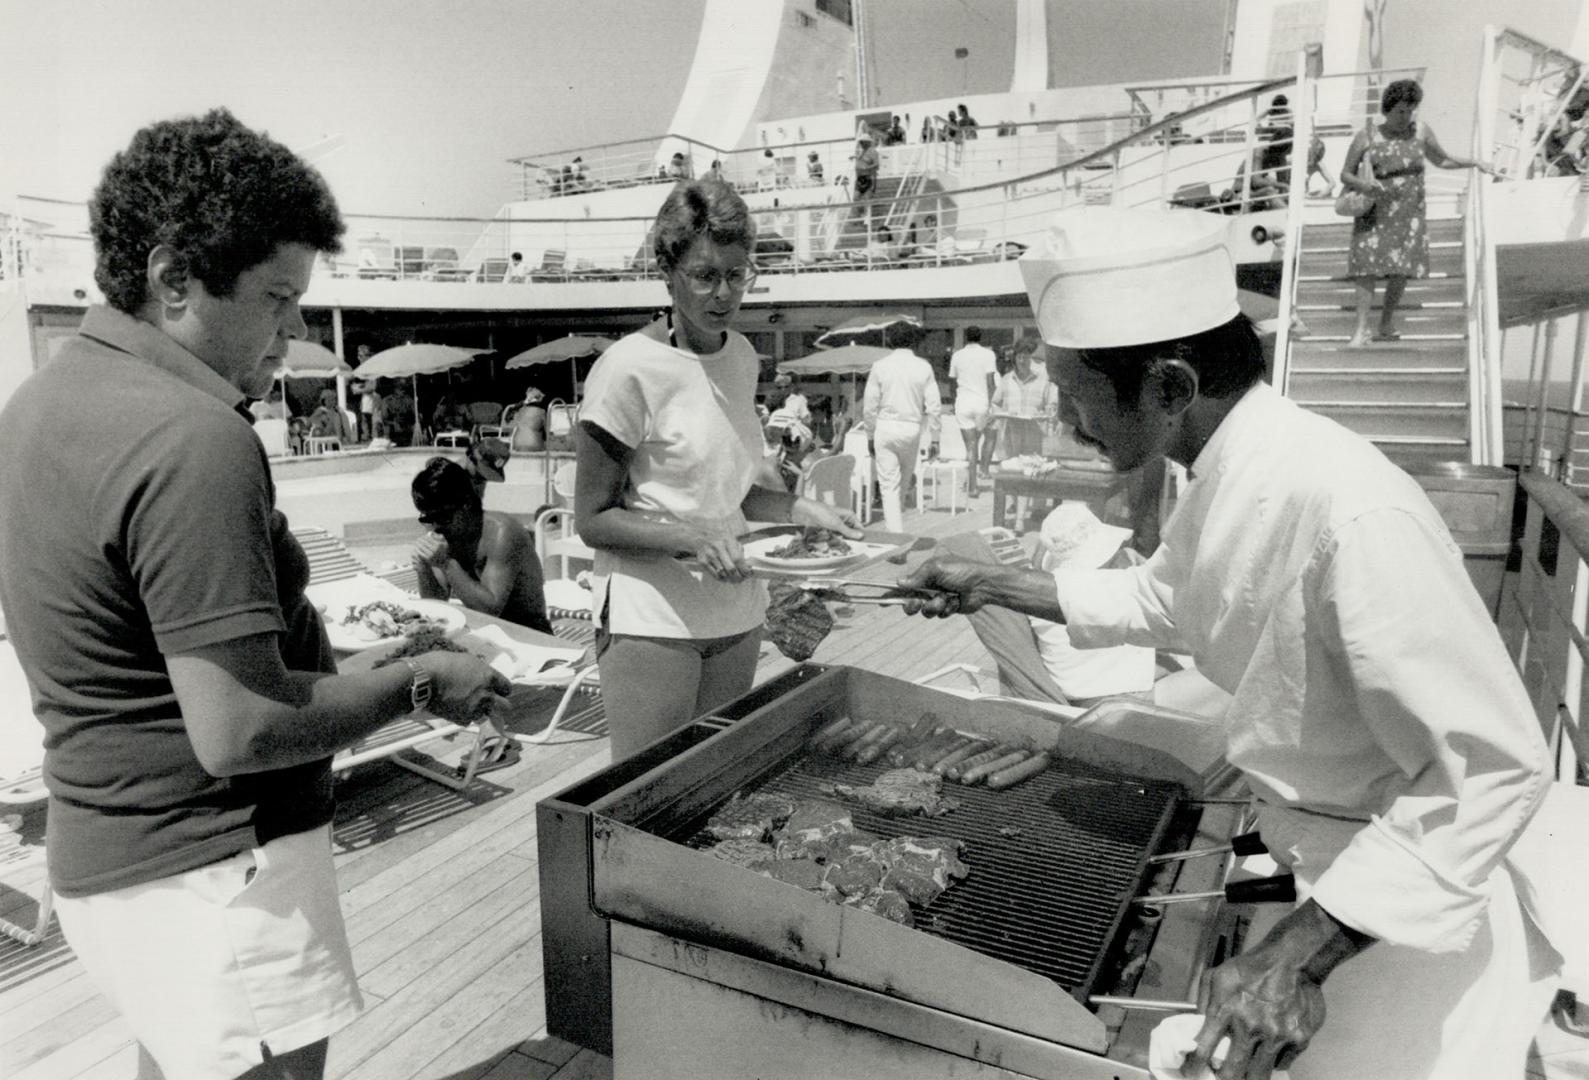 A major joy or problem aboard cruise liners, depending on your weight, is the endless supply of food, often delicious, that appeals to sea-whetted appetites